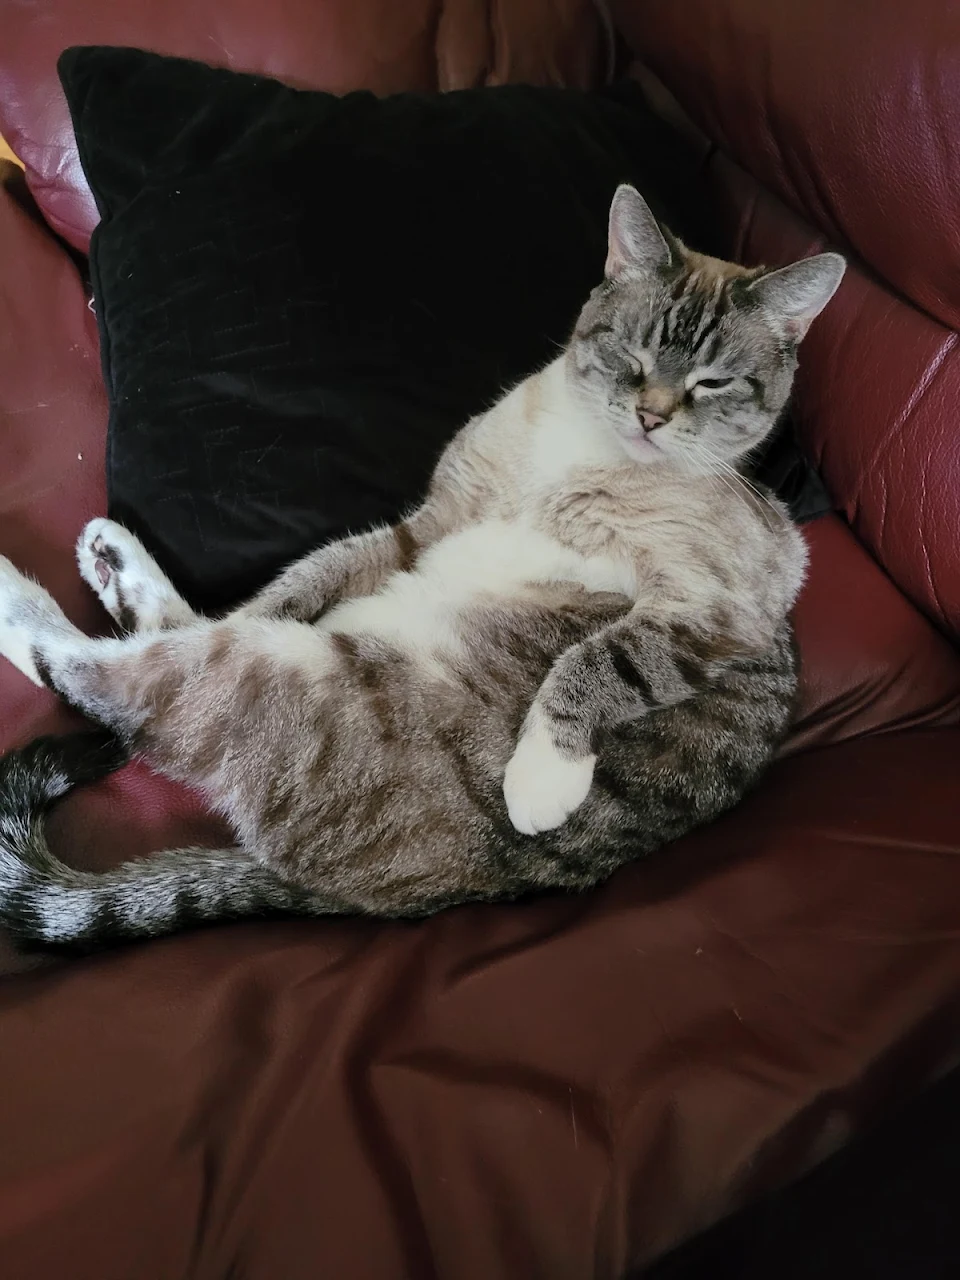 cat sitting on couch